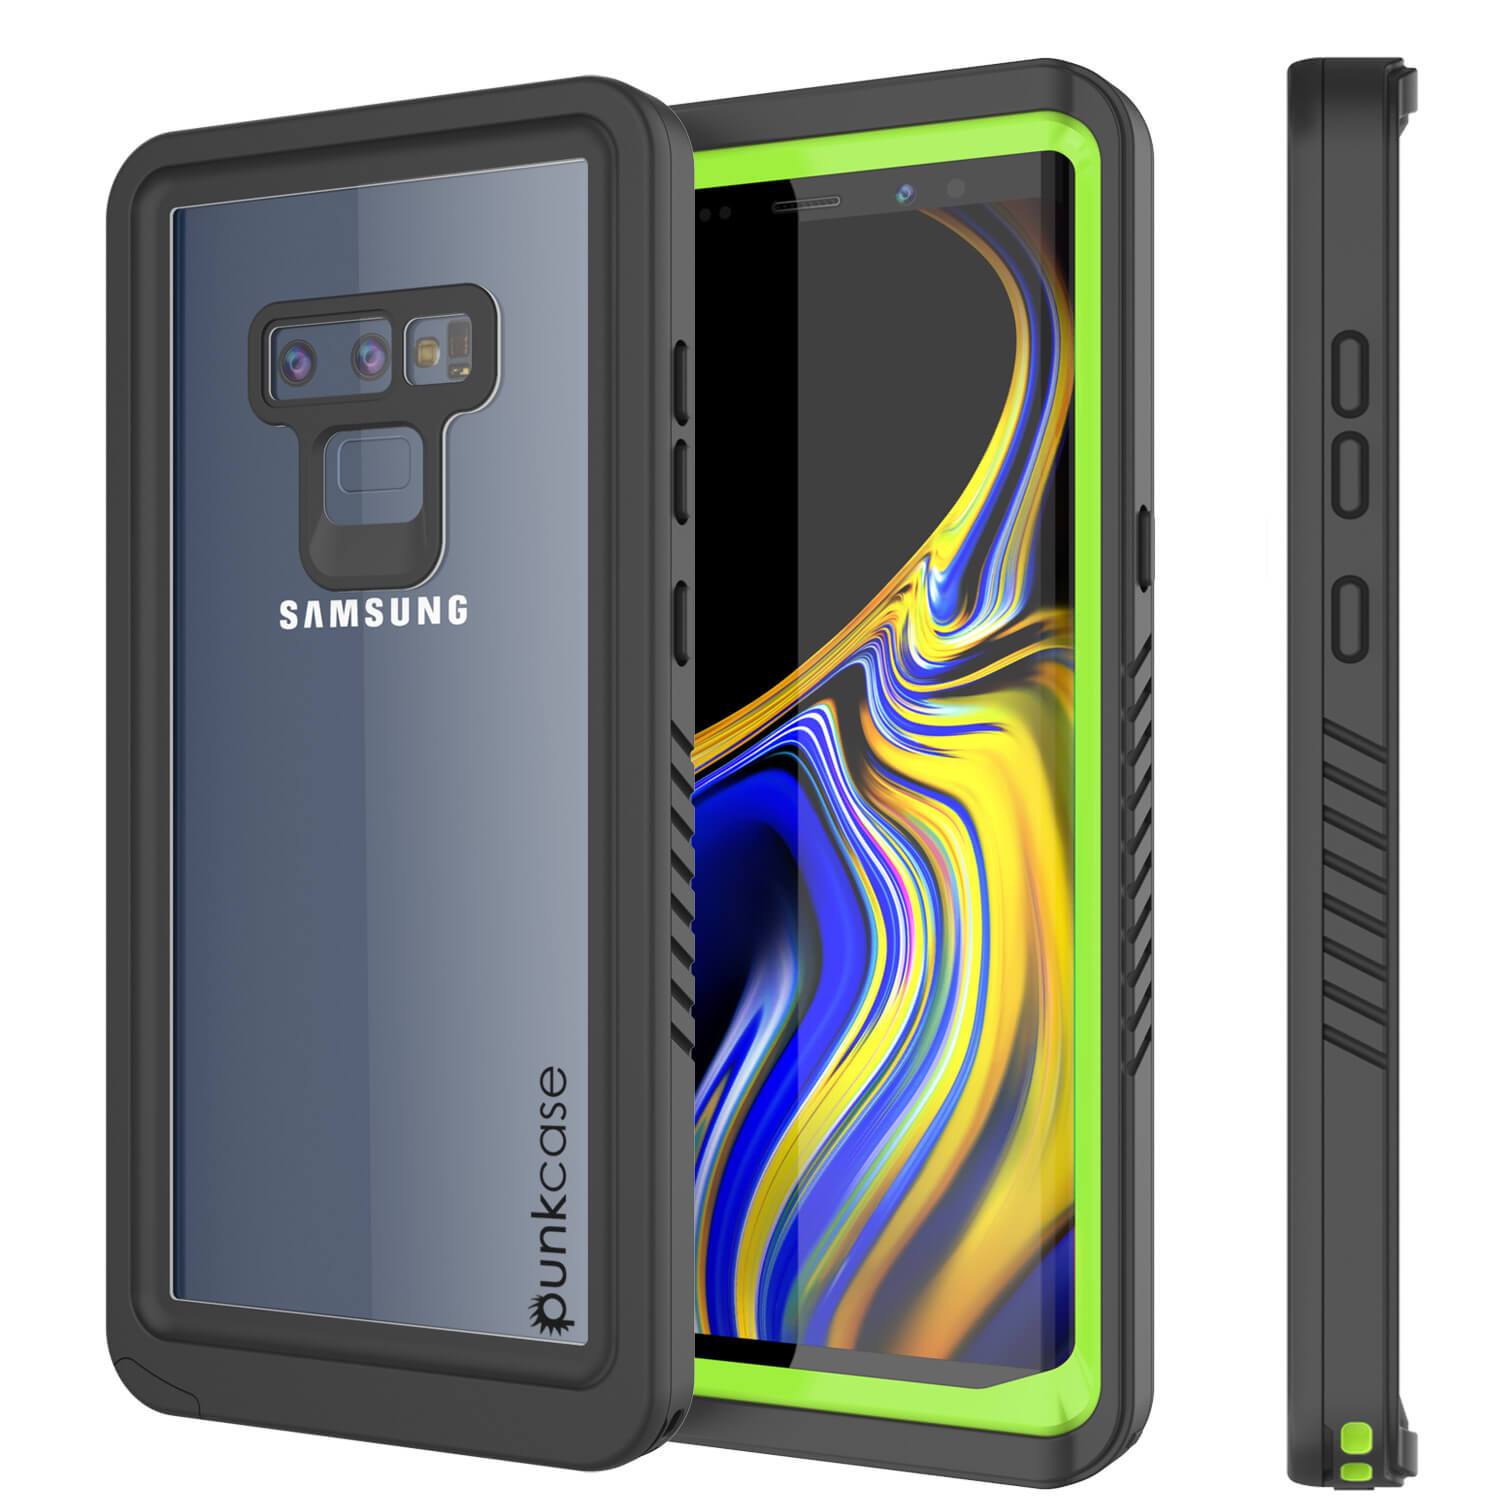 Galaxy Note 9 Case, Punkcase [Extreme Series] Armor Cover W/ Built In Screen Protector [Light Green]